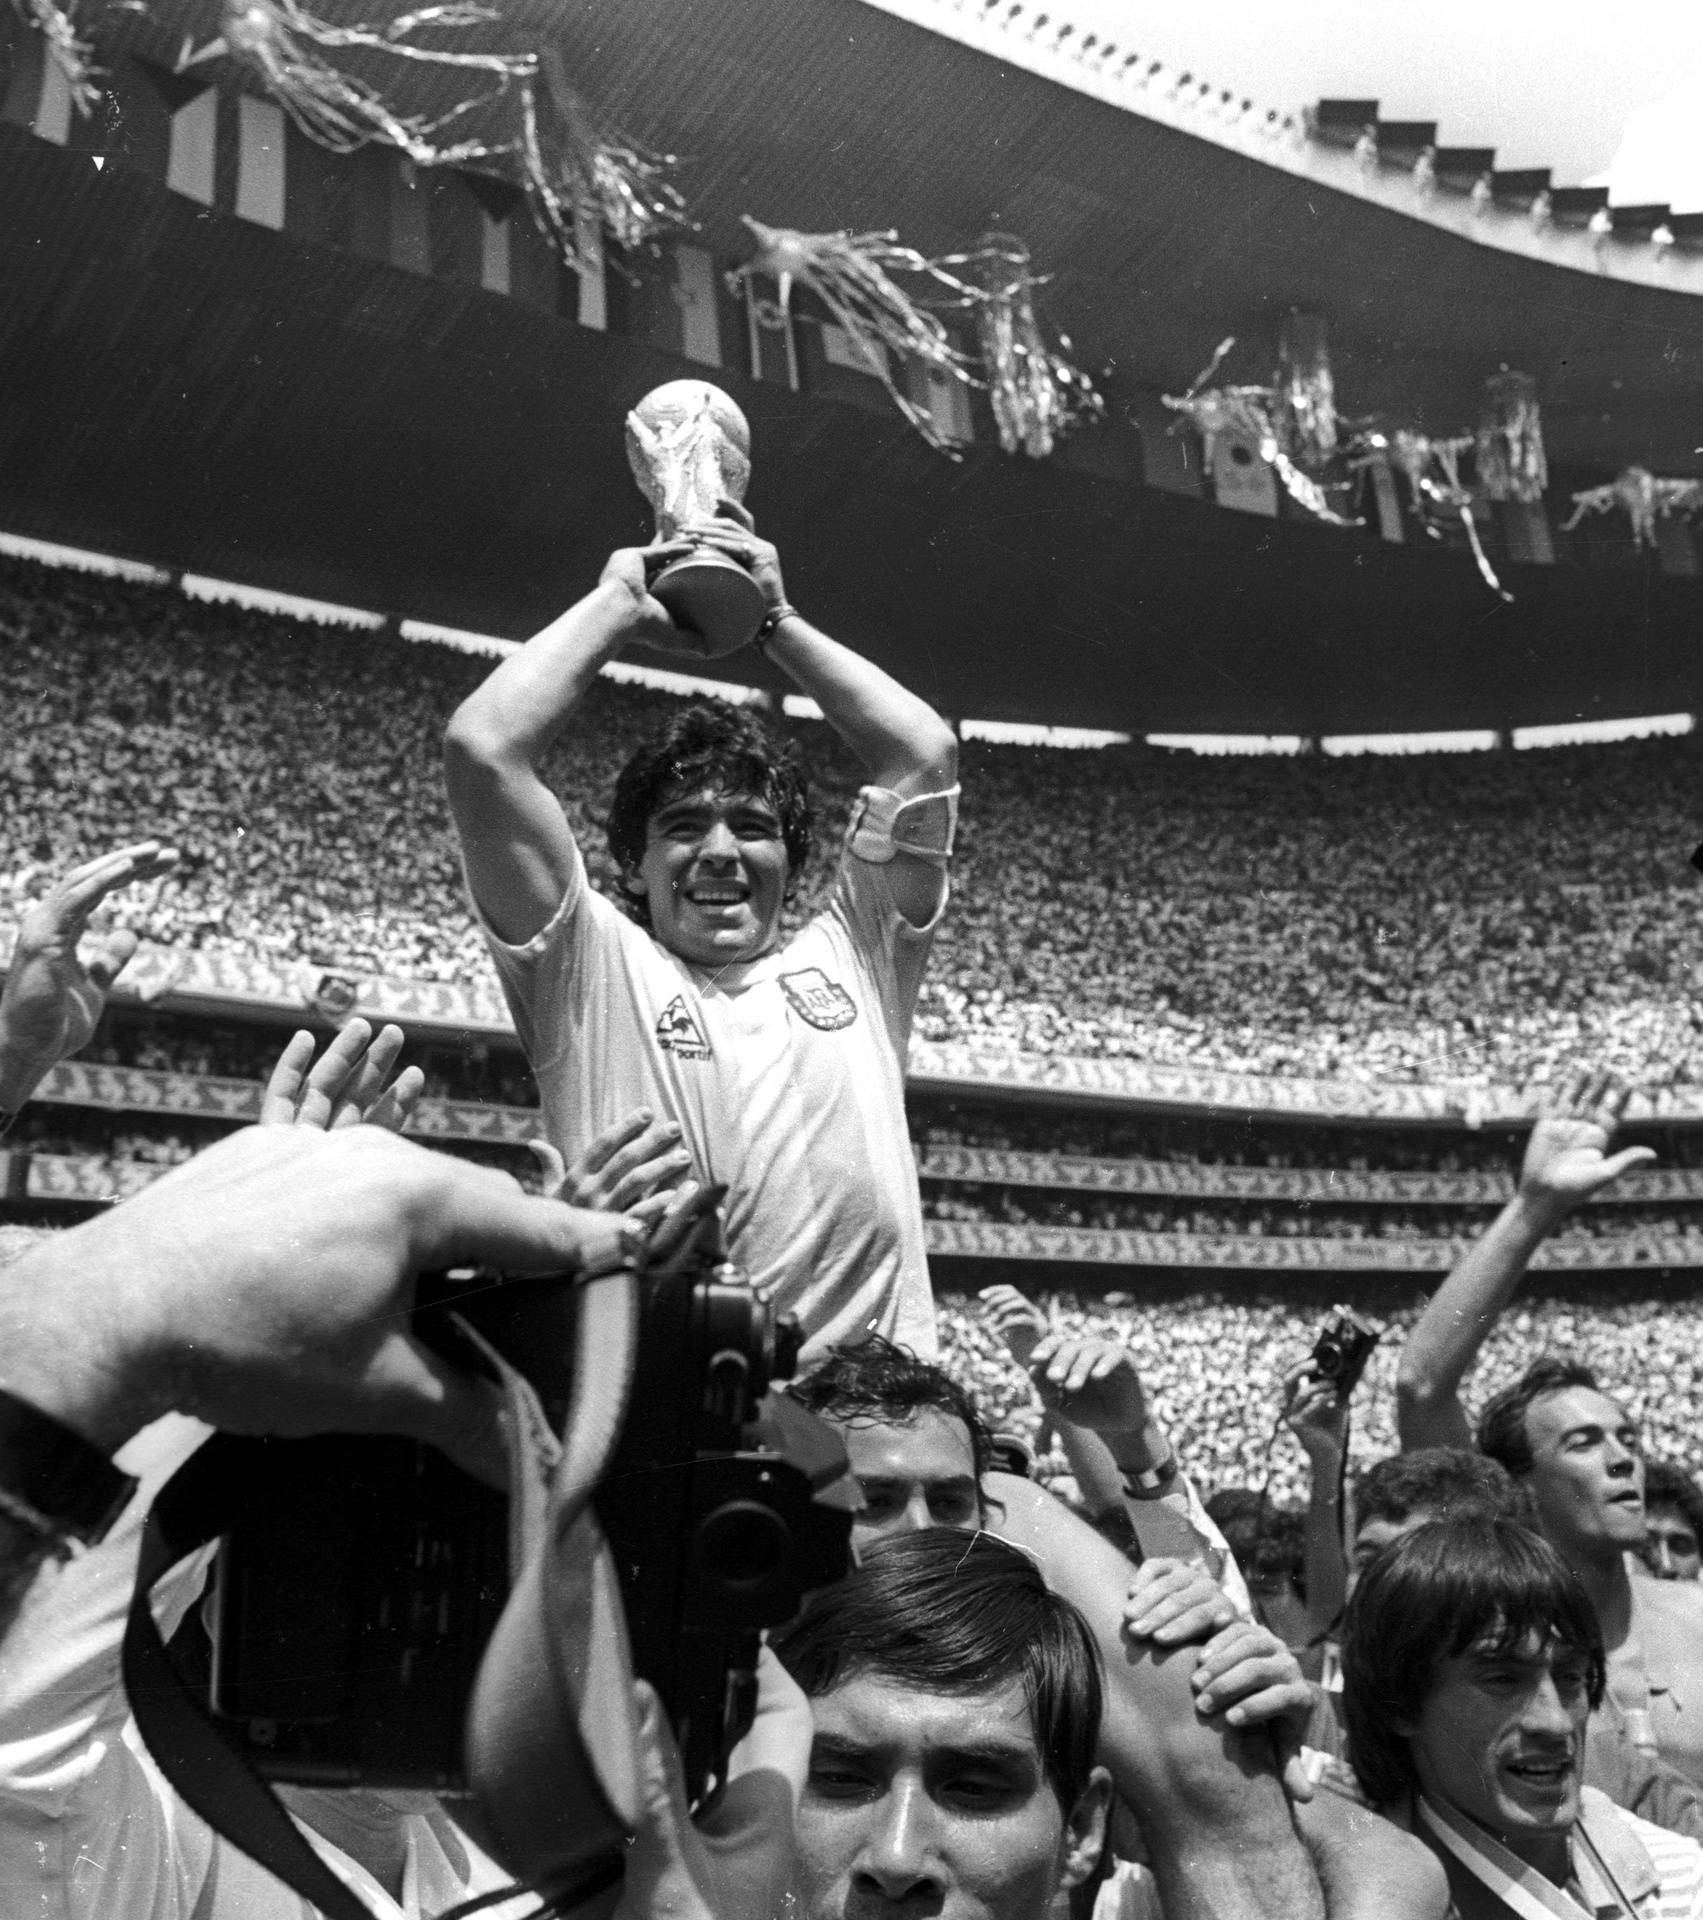 FILE PHOTO: FILE PHOTO: ARGENTINA'S MARADONA LIFTS THE WORLD CUP AFTER MATCH AGAINST WEST GERMANY IN MEXICO.